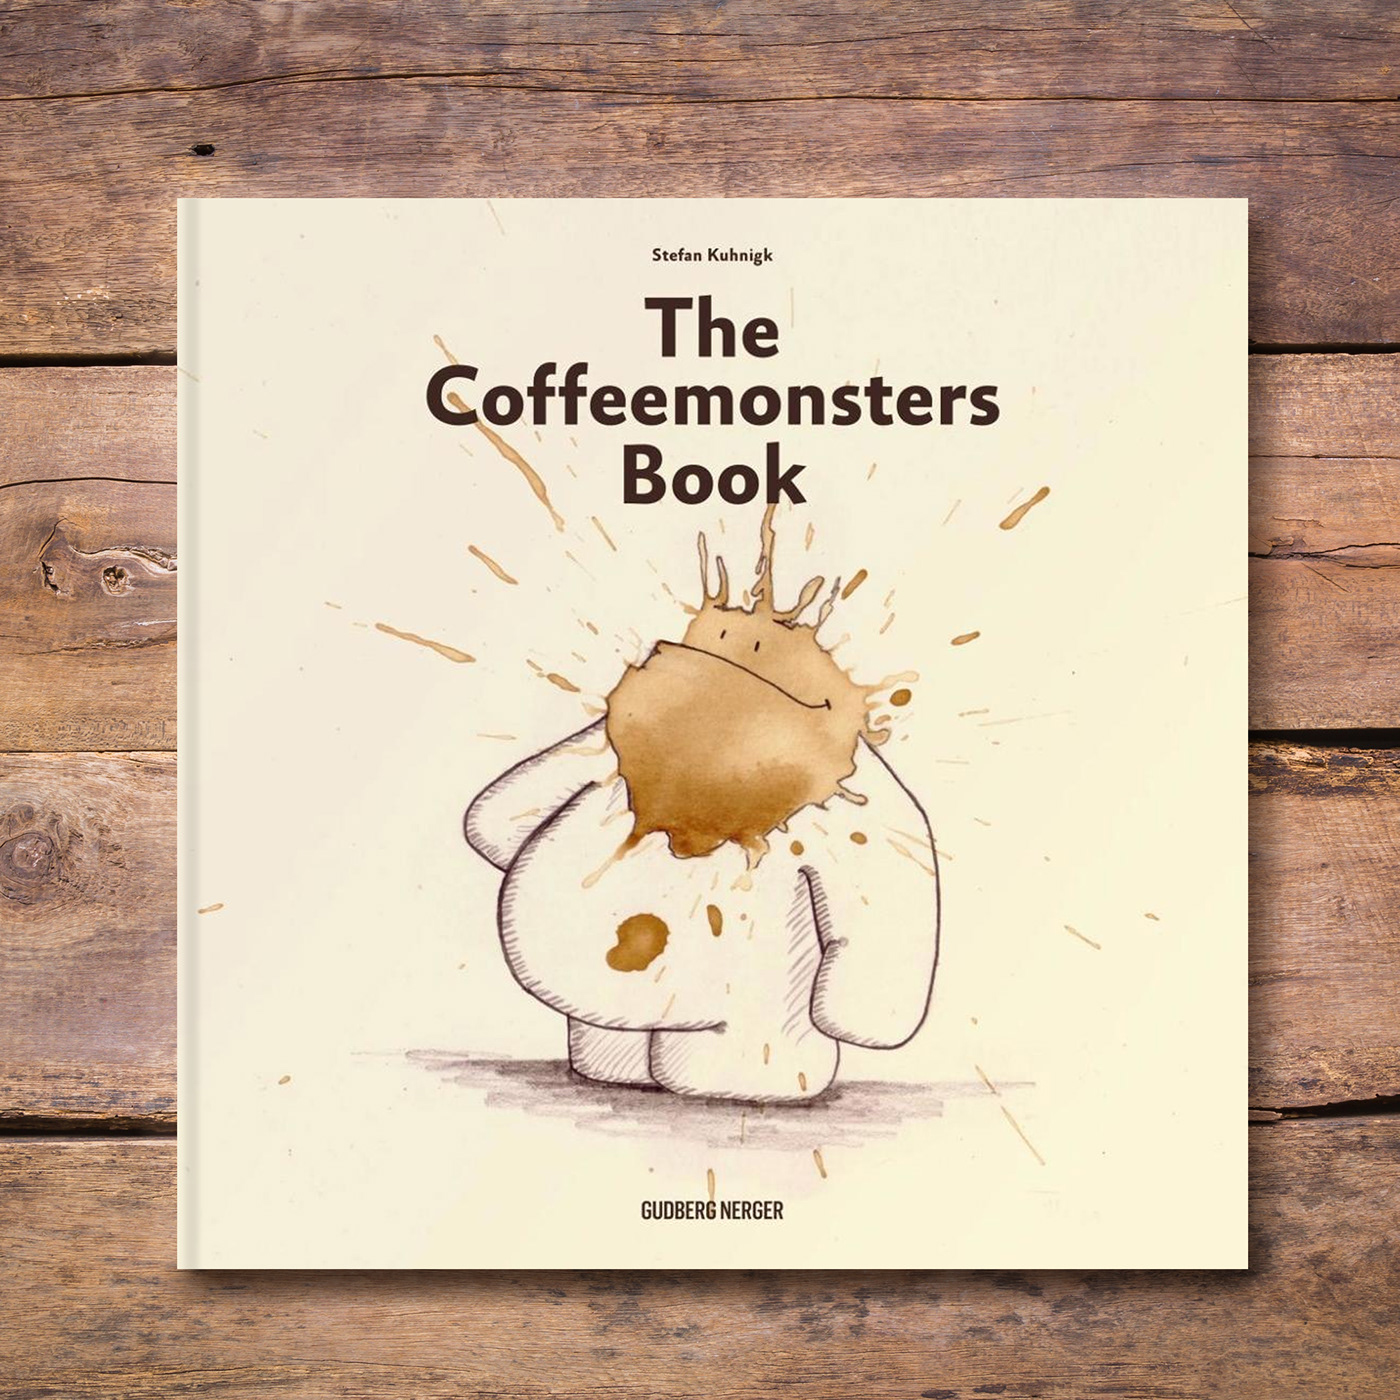 Coffee stain coffeemonsters coffeemonster monster monsters drink spill dry draw pencil paper idea creative